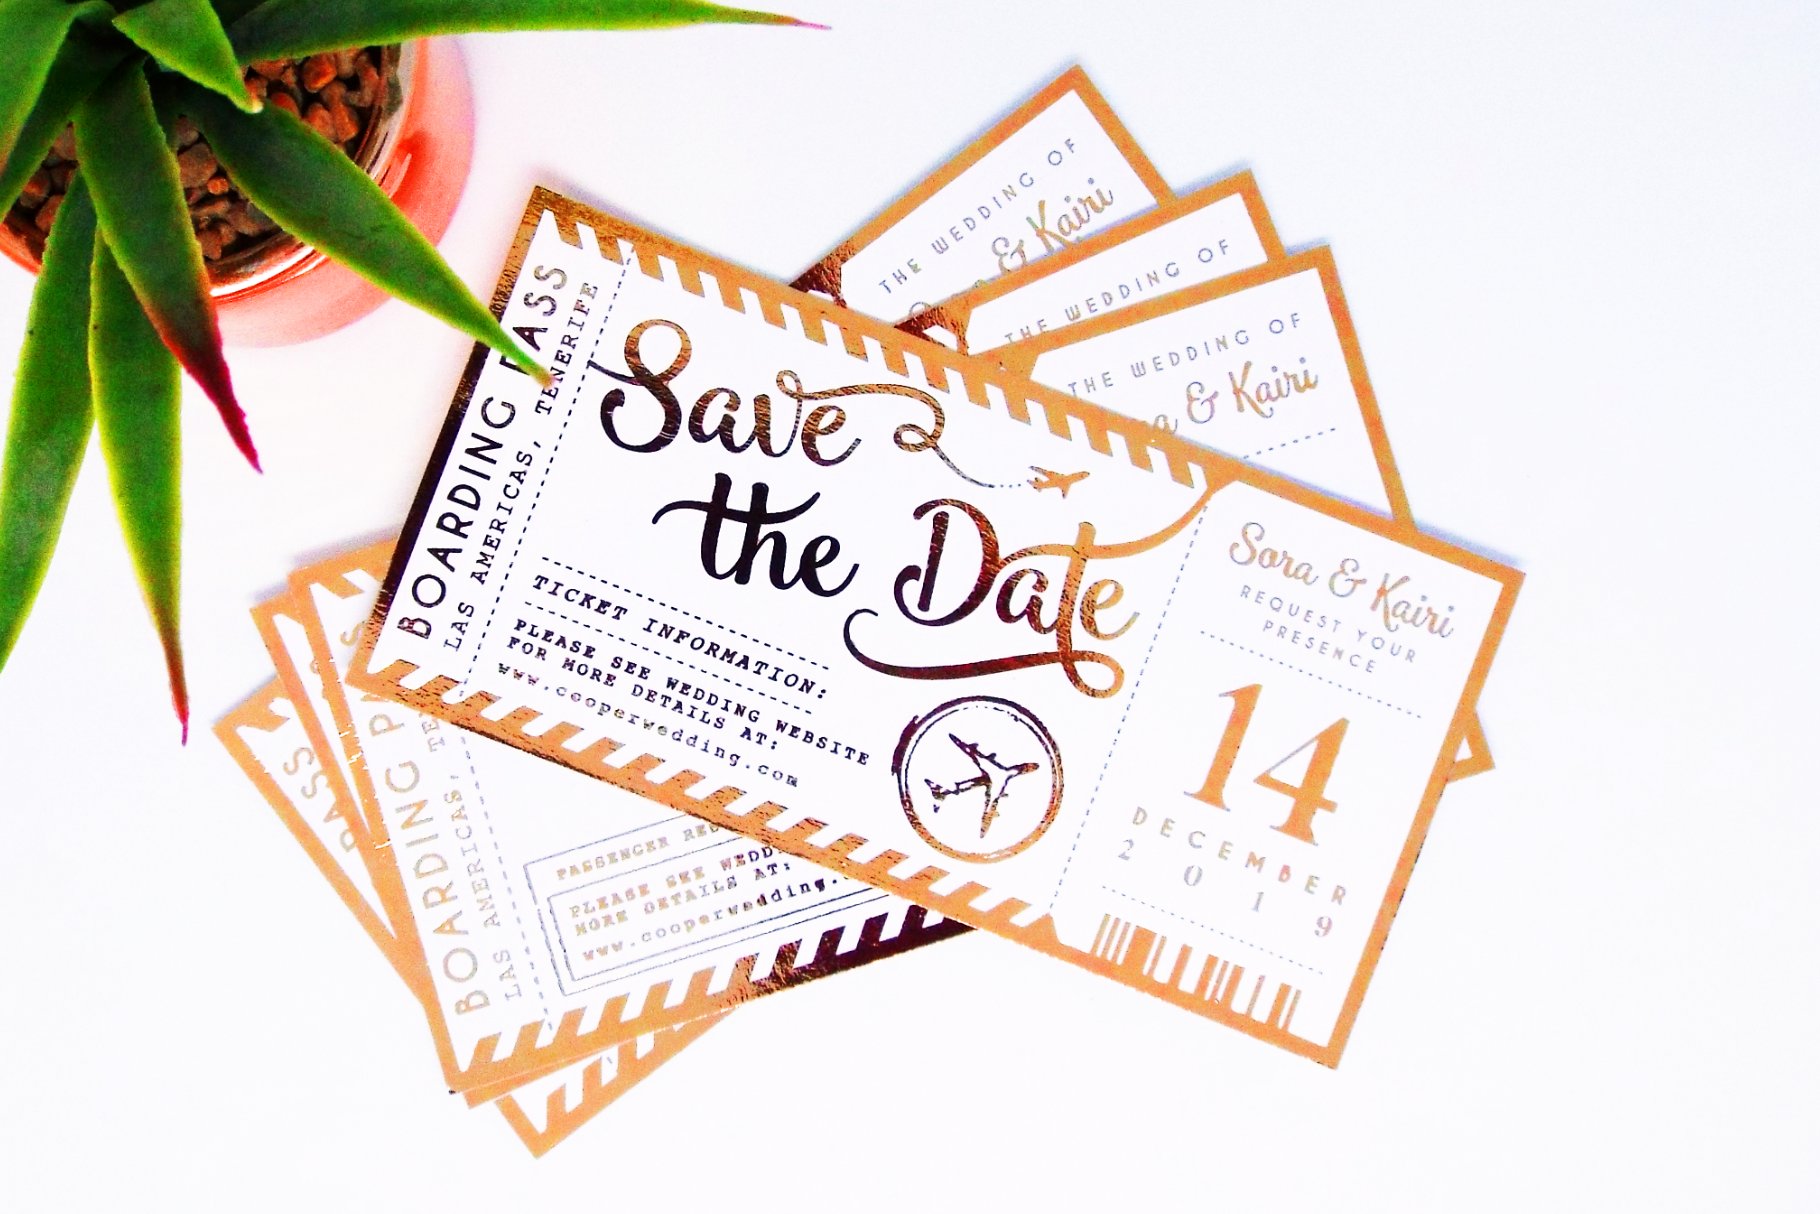 Save the Date Plane Ticket Template cover image.